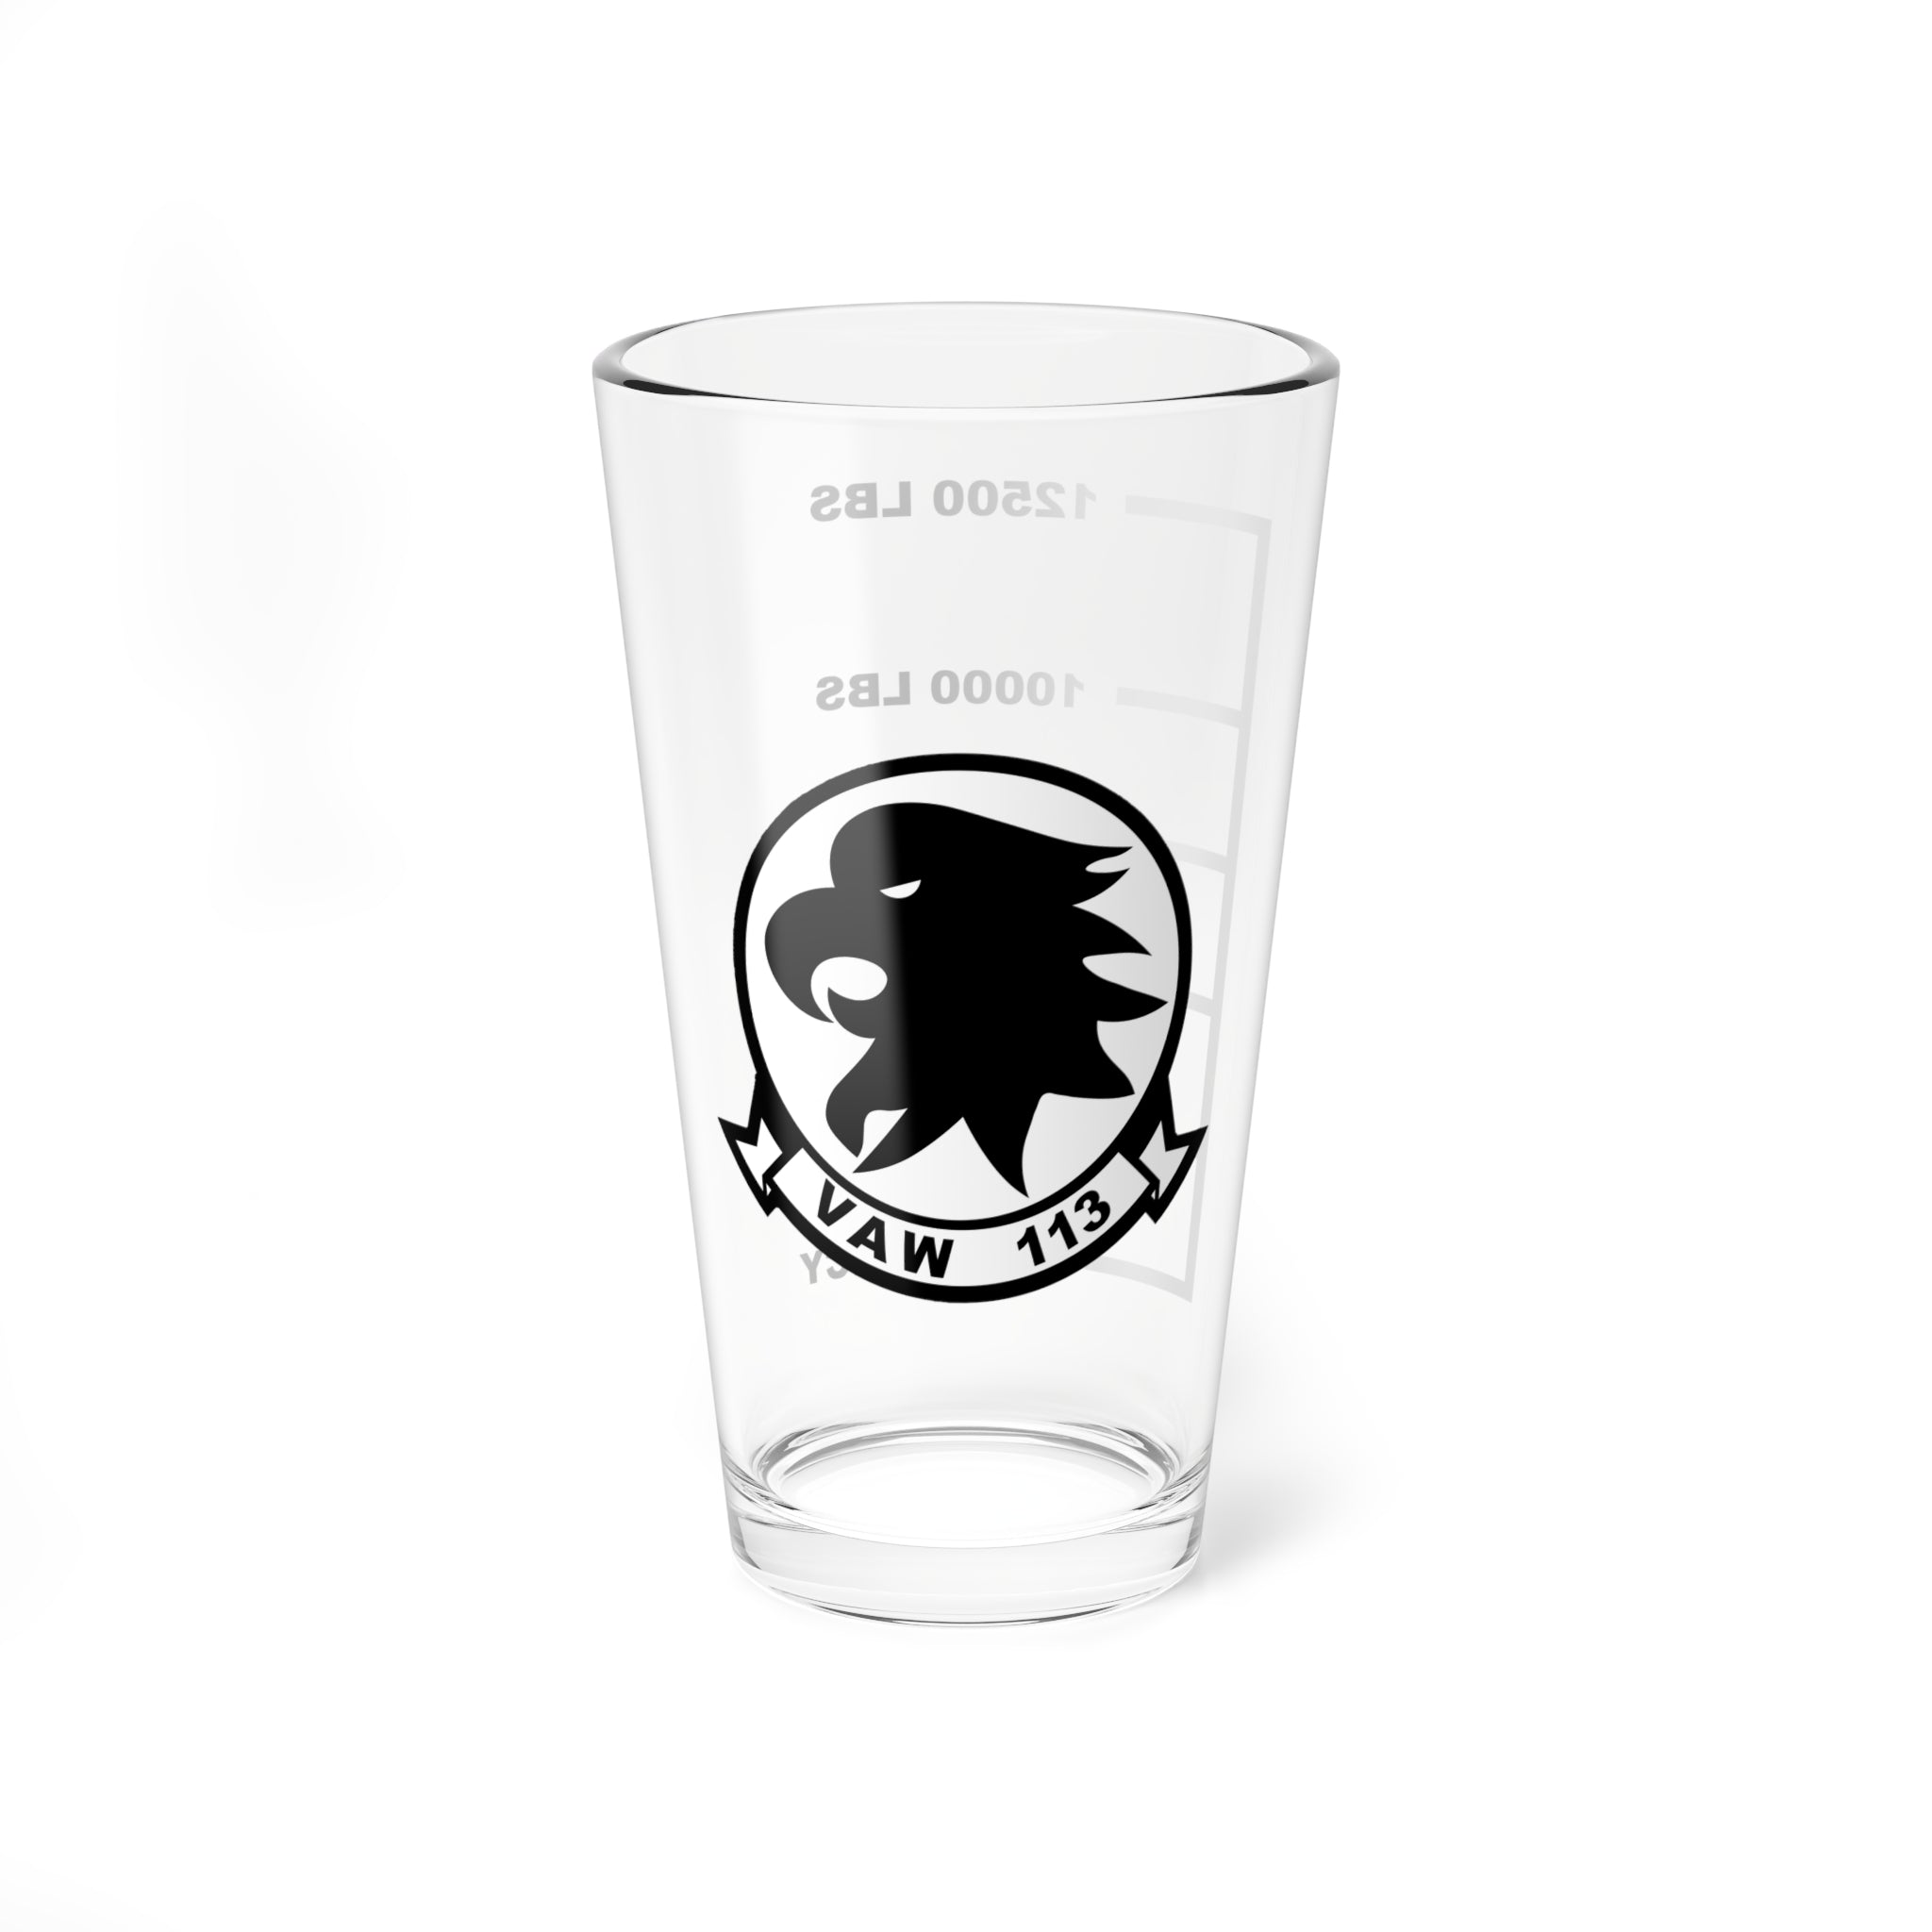 VAW-113 "Black Eagles"  Fuel Low Pint Glass, 16oz, Navy Airborne Early Warning Squadron Flying the E-2 Hawkeye